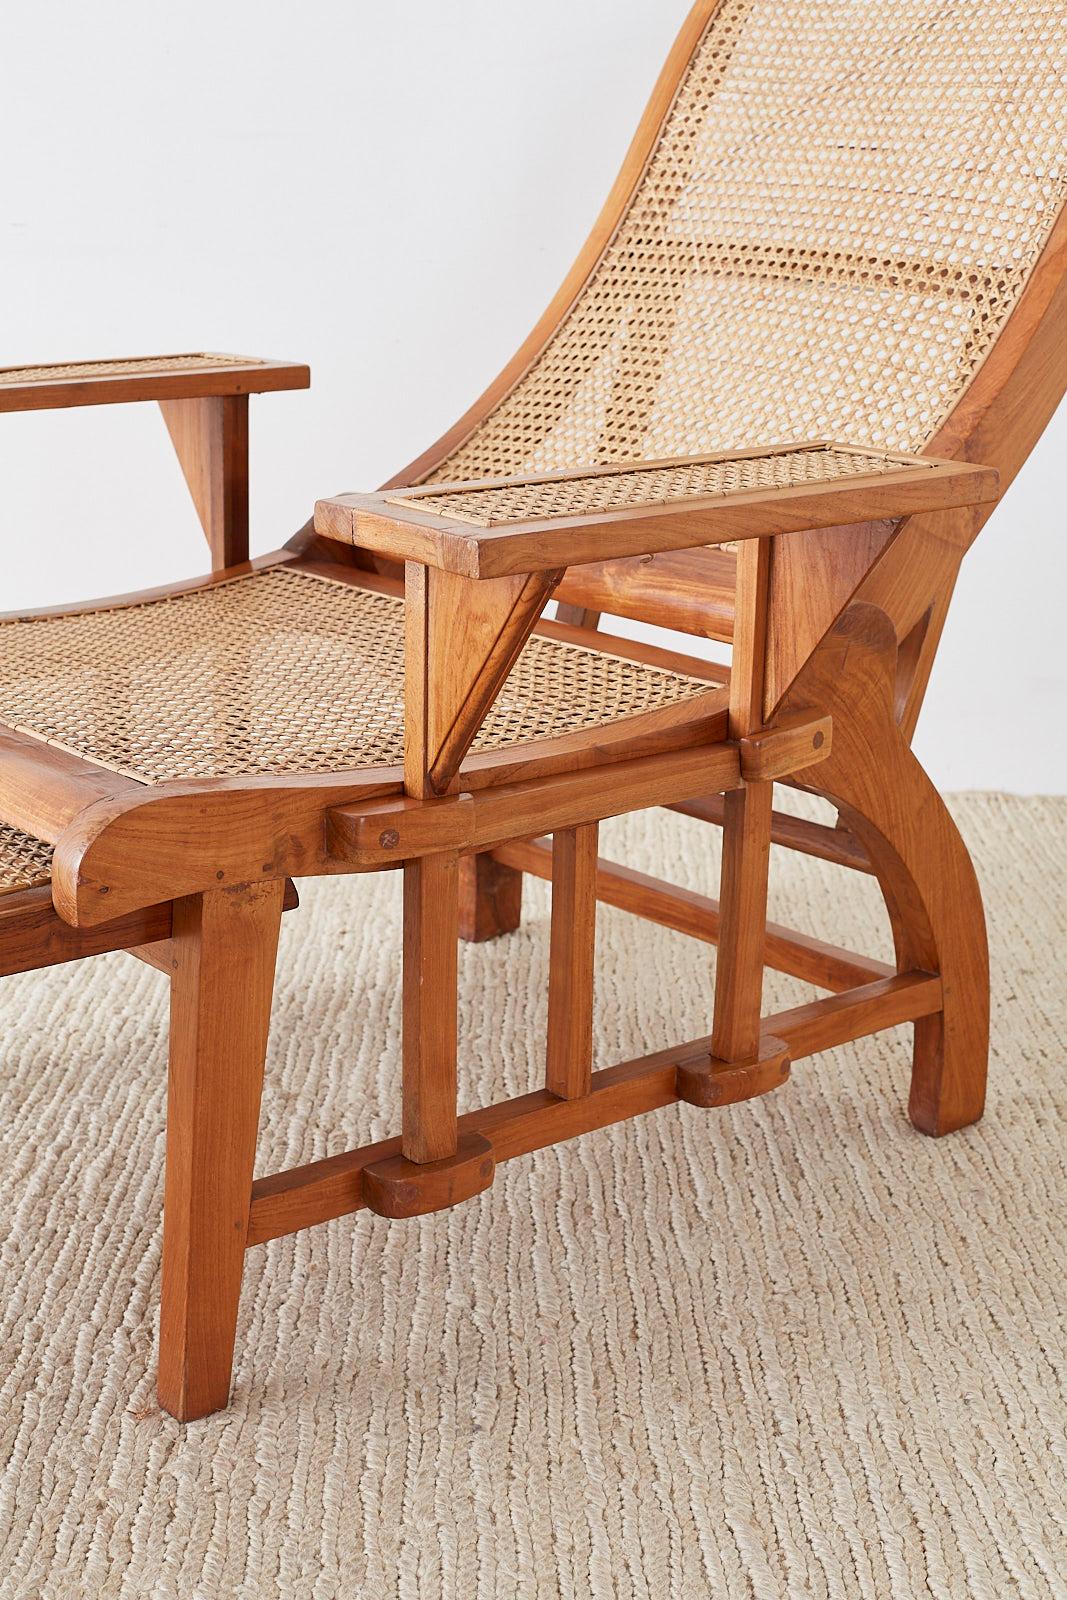 British Colonial Caned Teak Plantation Lounger with Ottoman 3